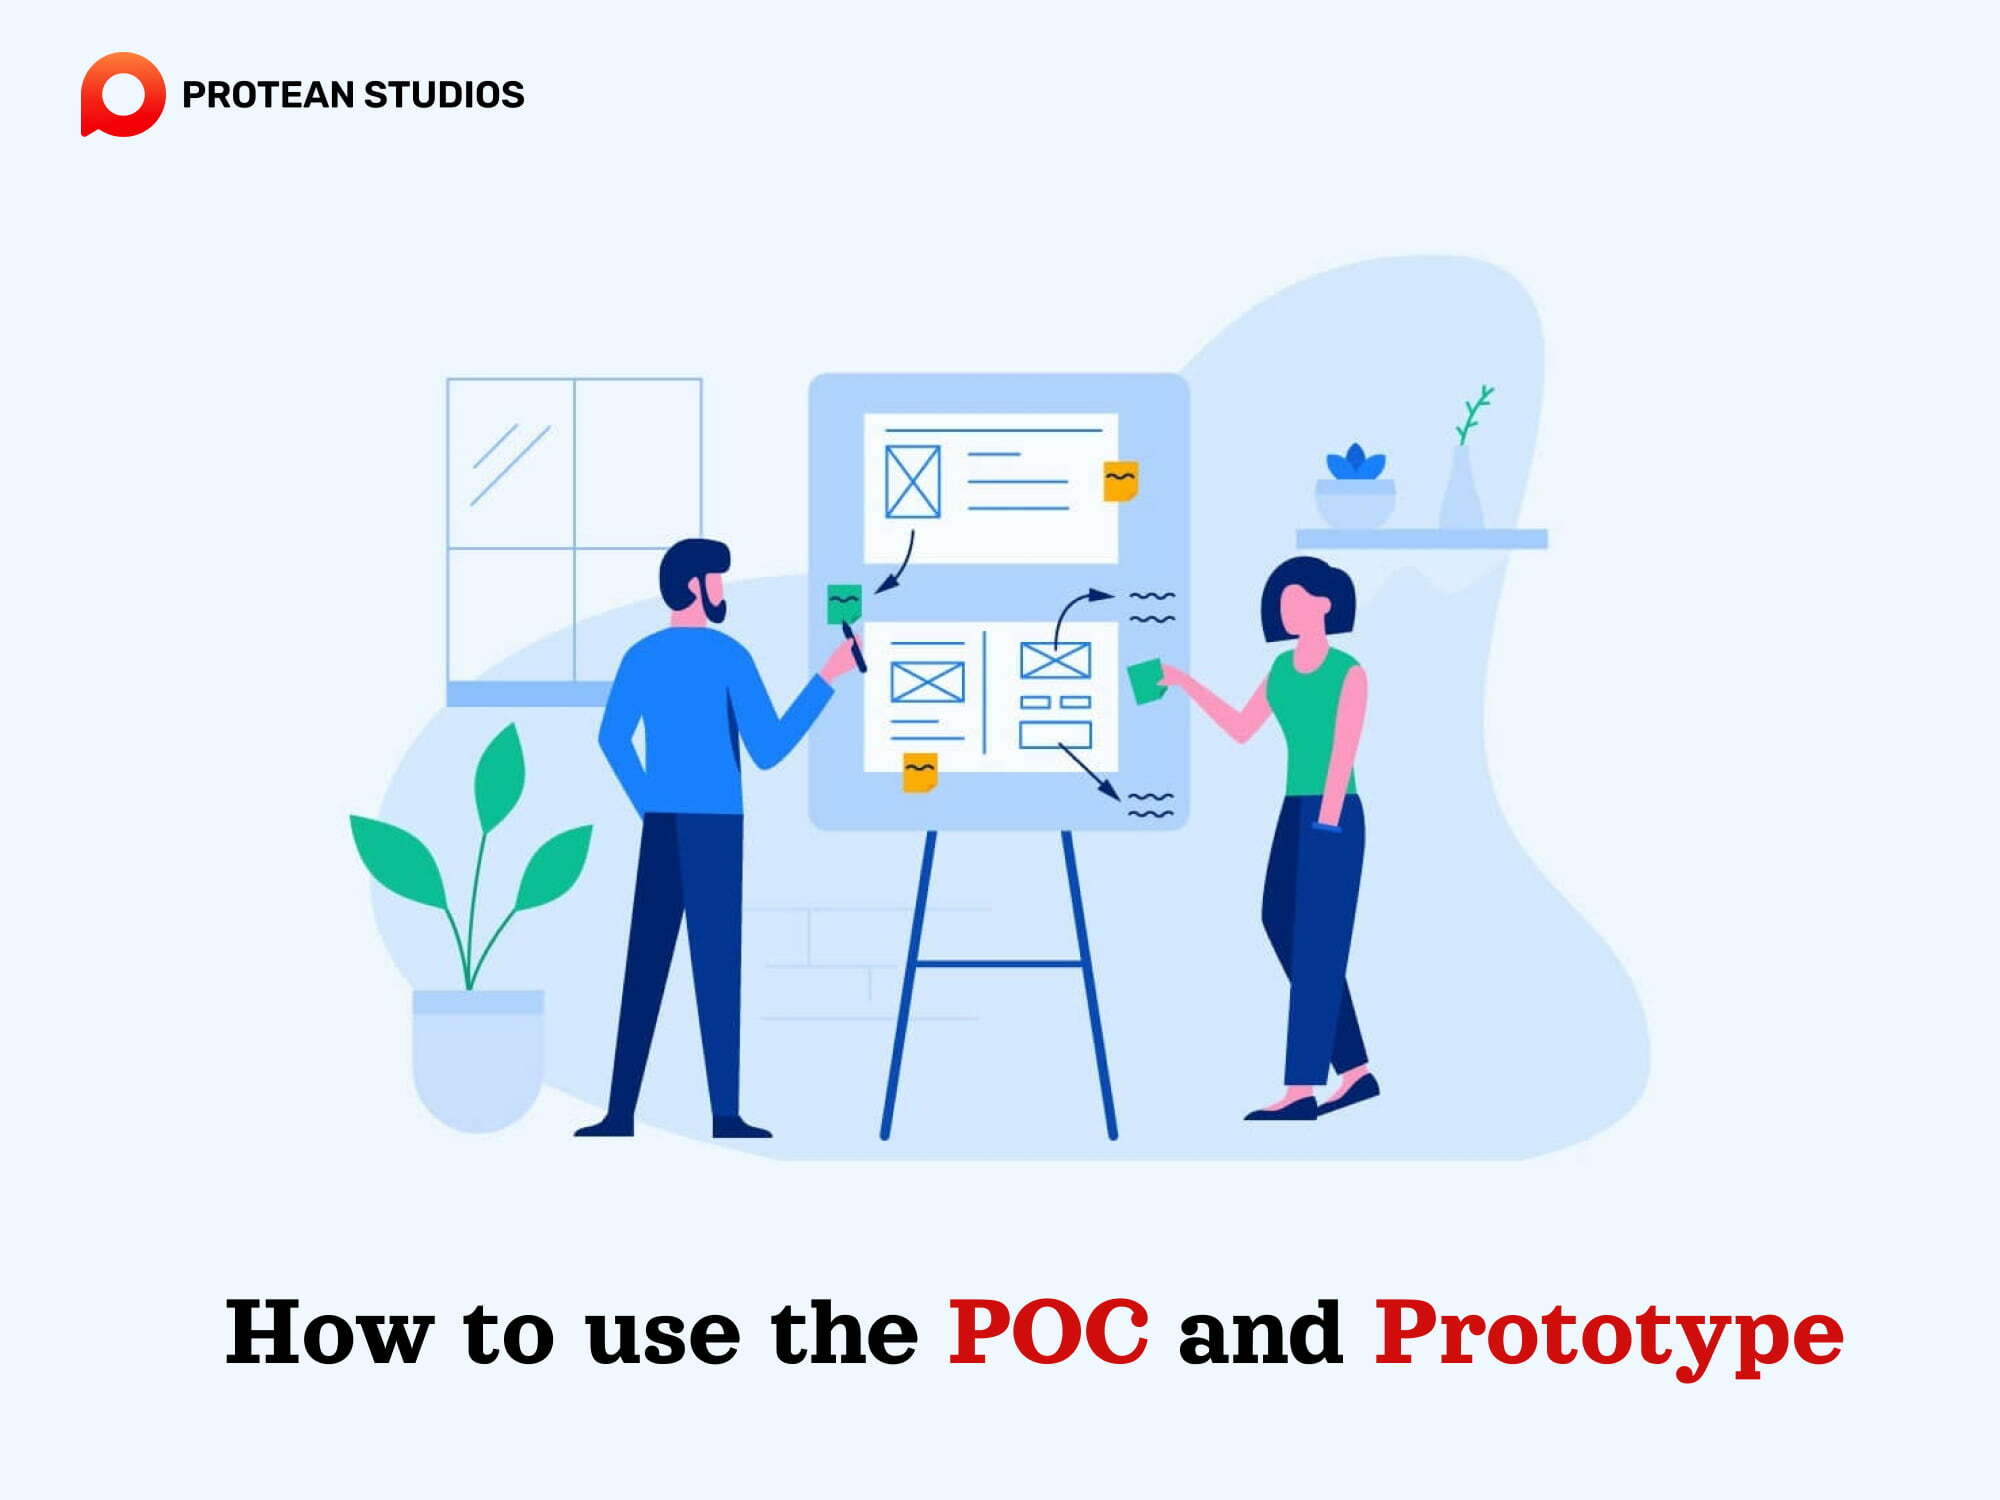 Some situations that should have a POC and prototype